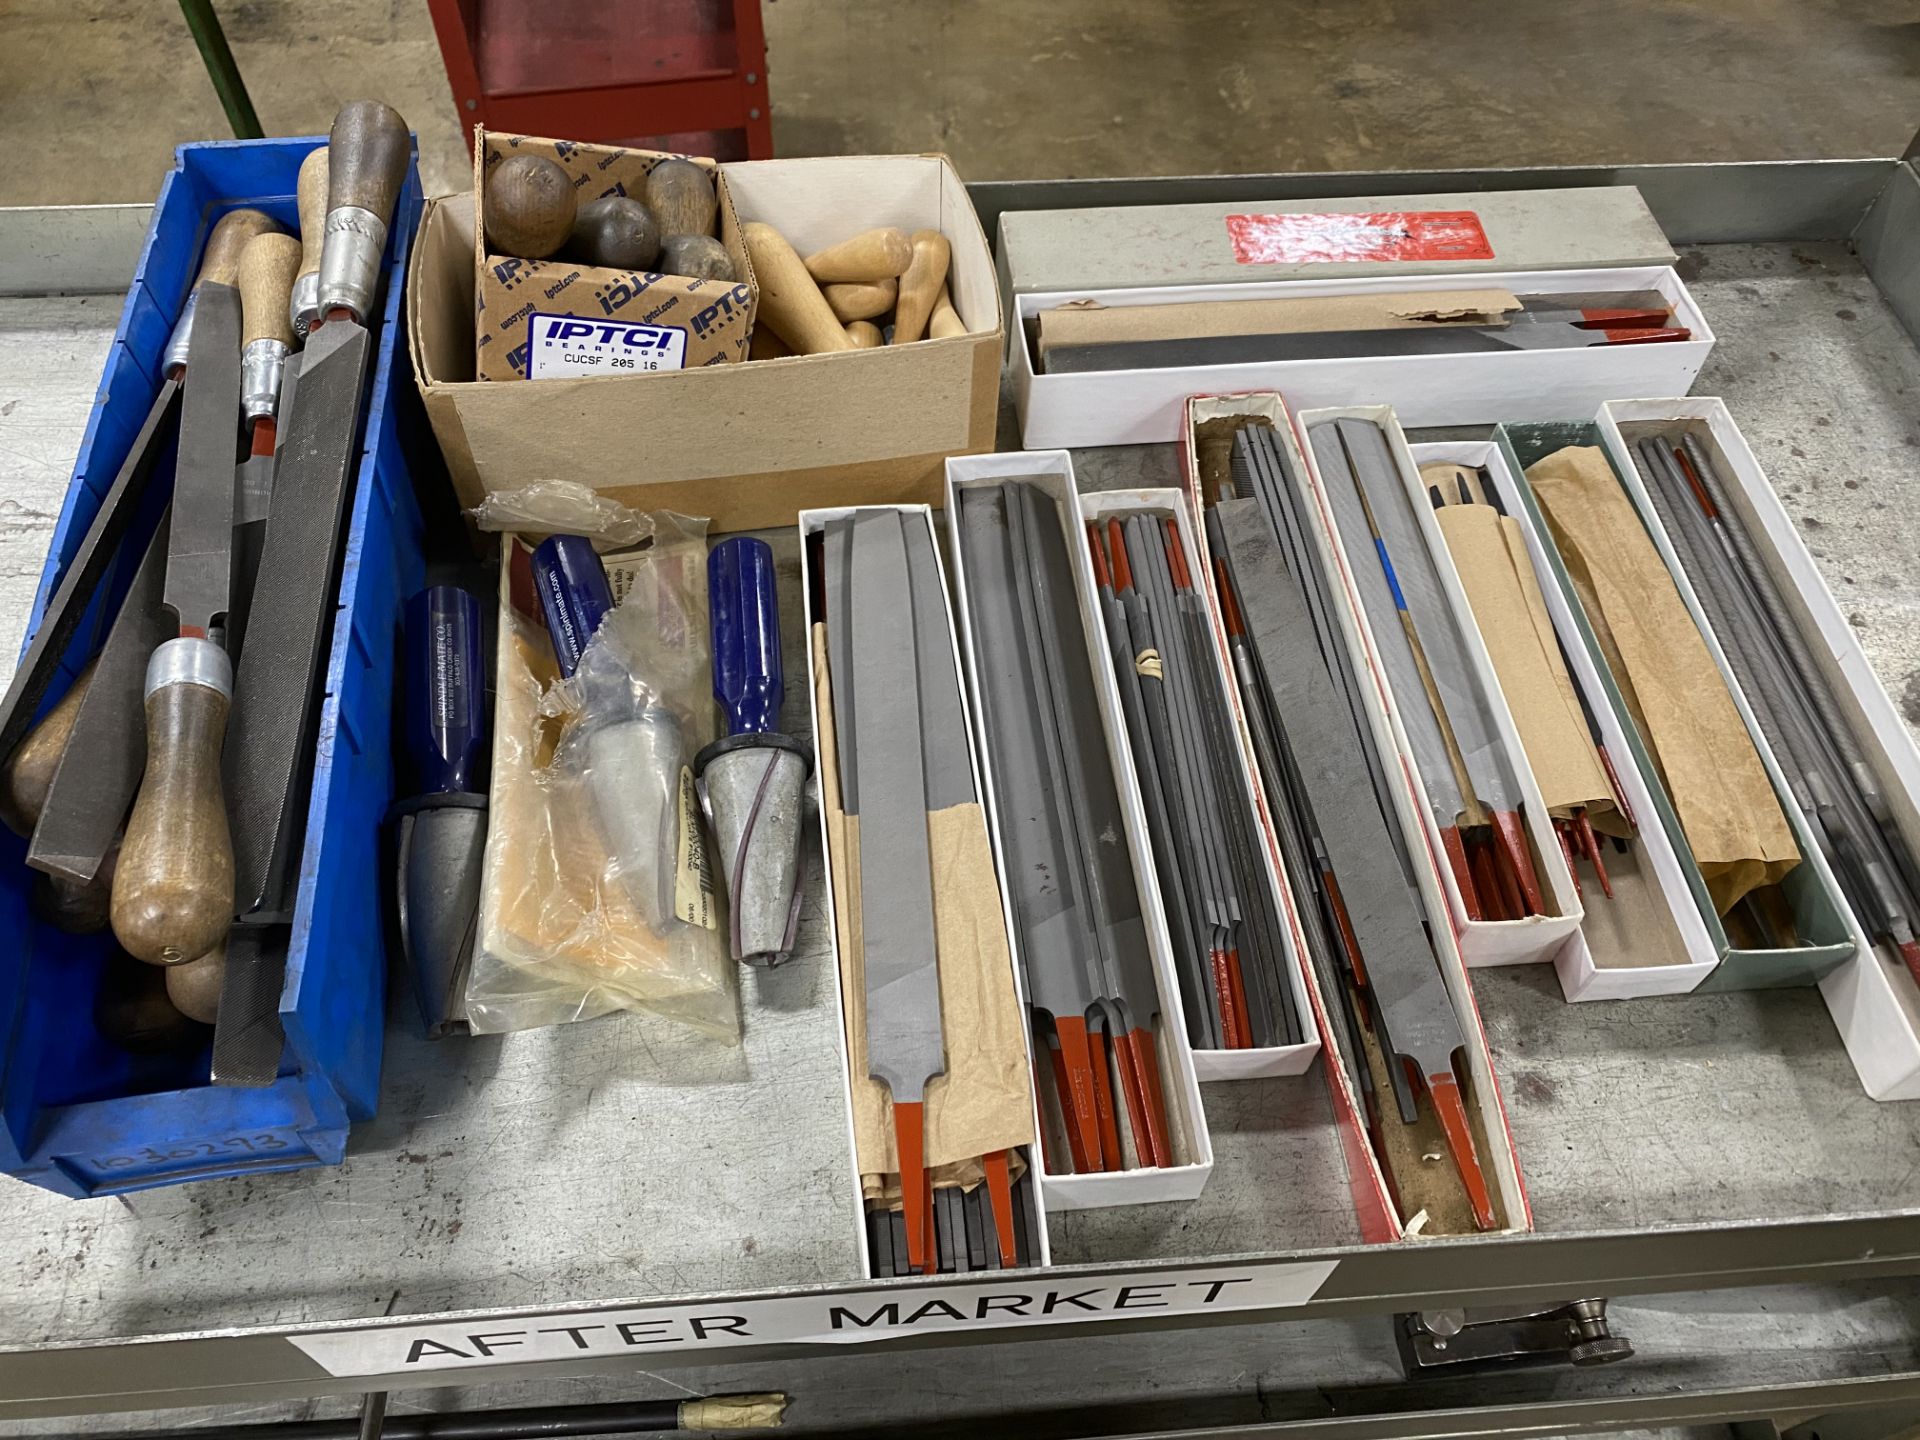 Lot of NEW Precision Cut Files and Handles